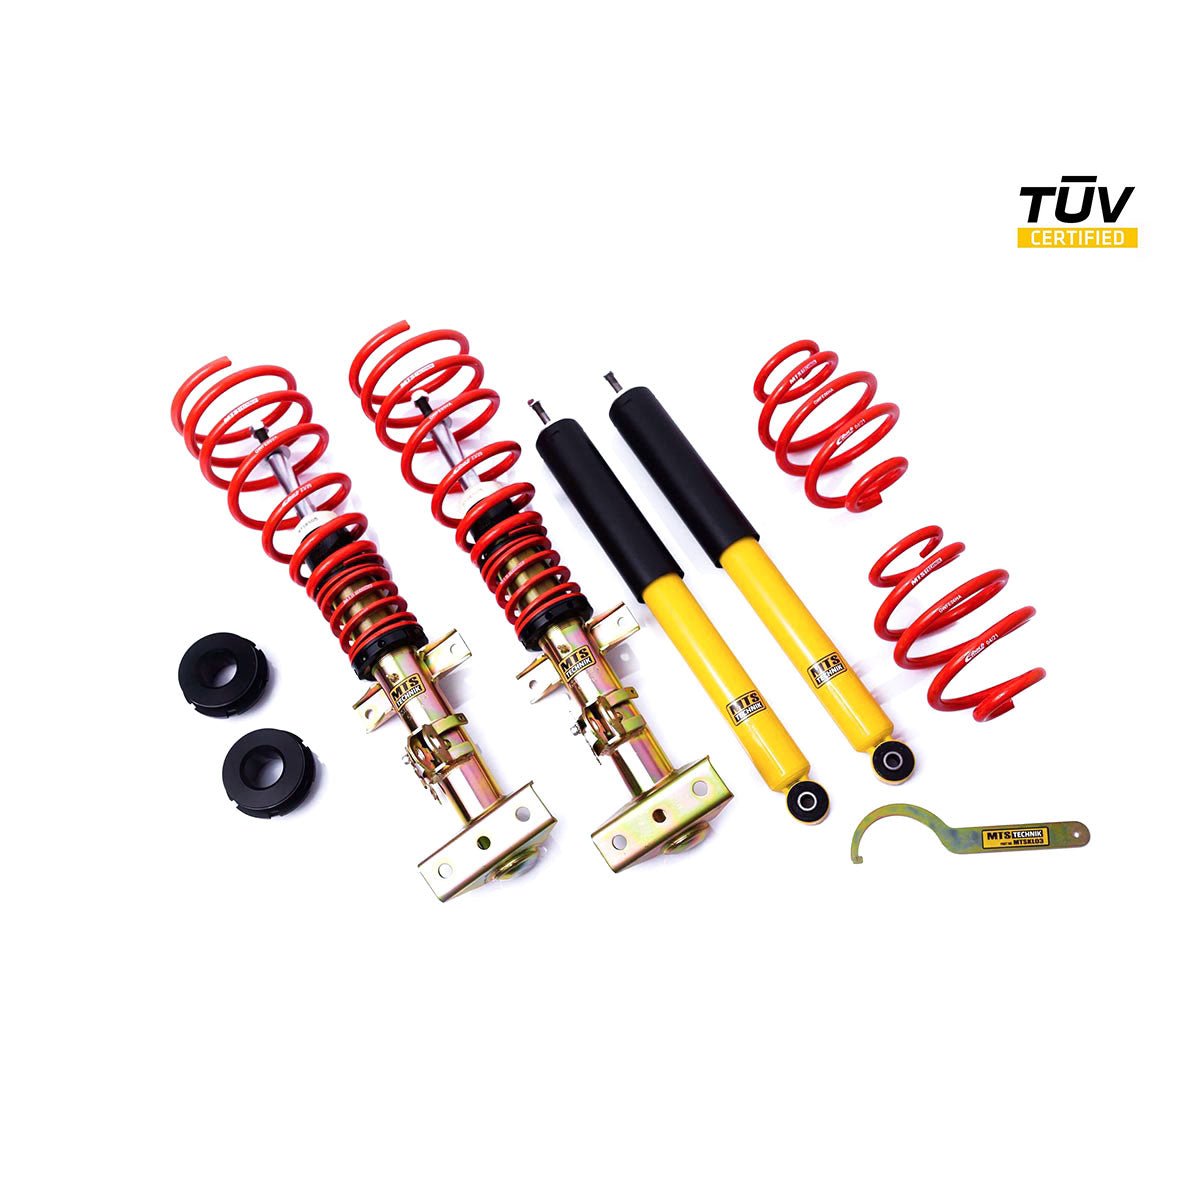 MTS TECHNIK coilover kit COMFORT BMW Z3 Roadster (with TÜV) - PARTS33 GmbH